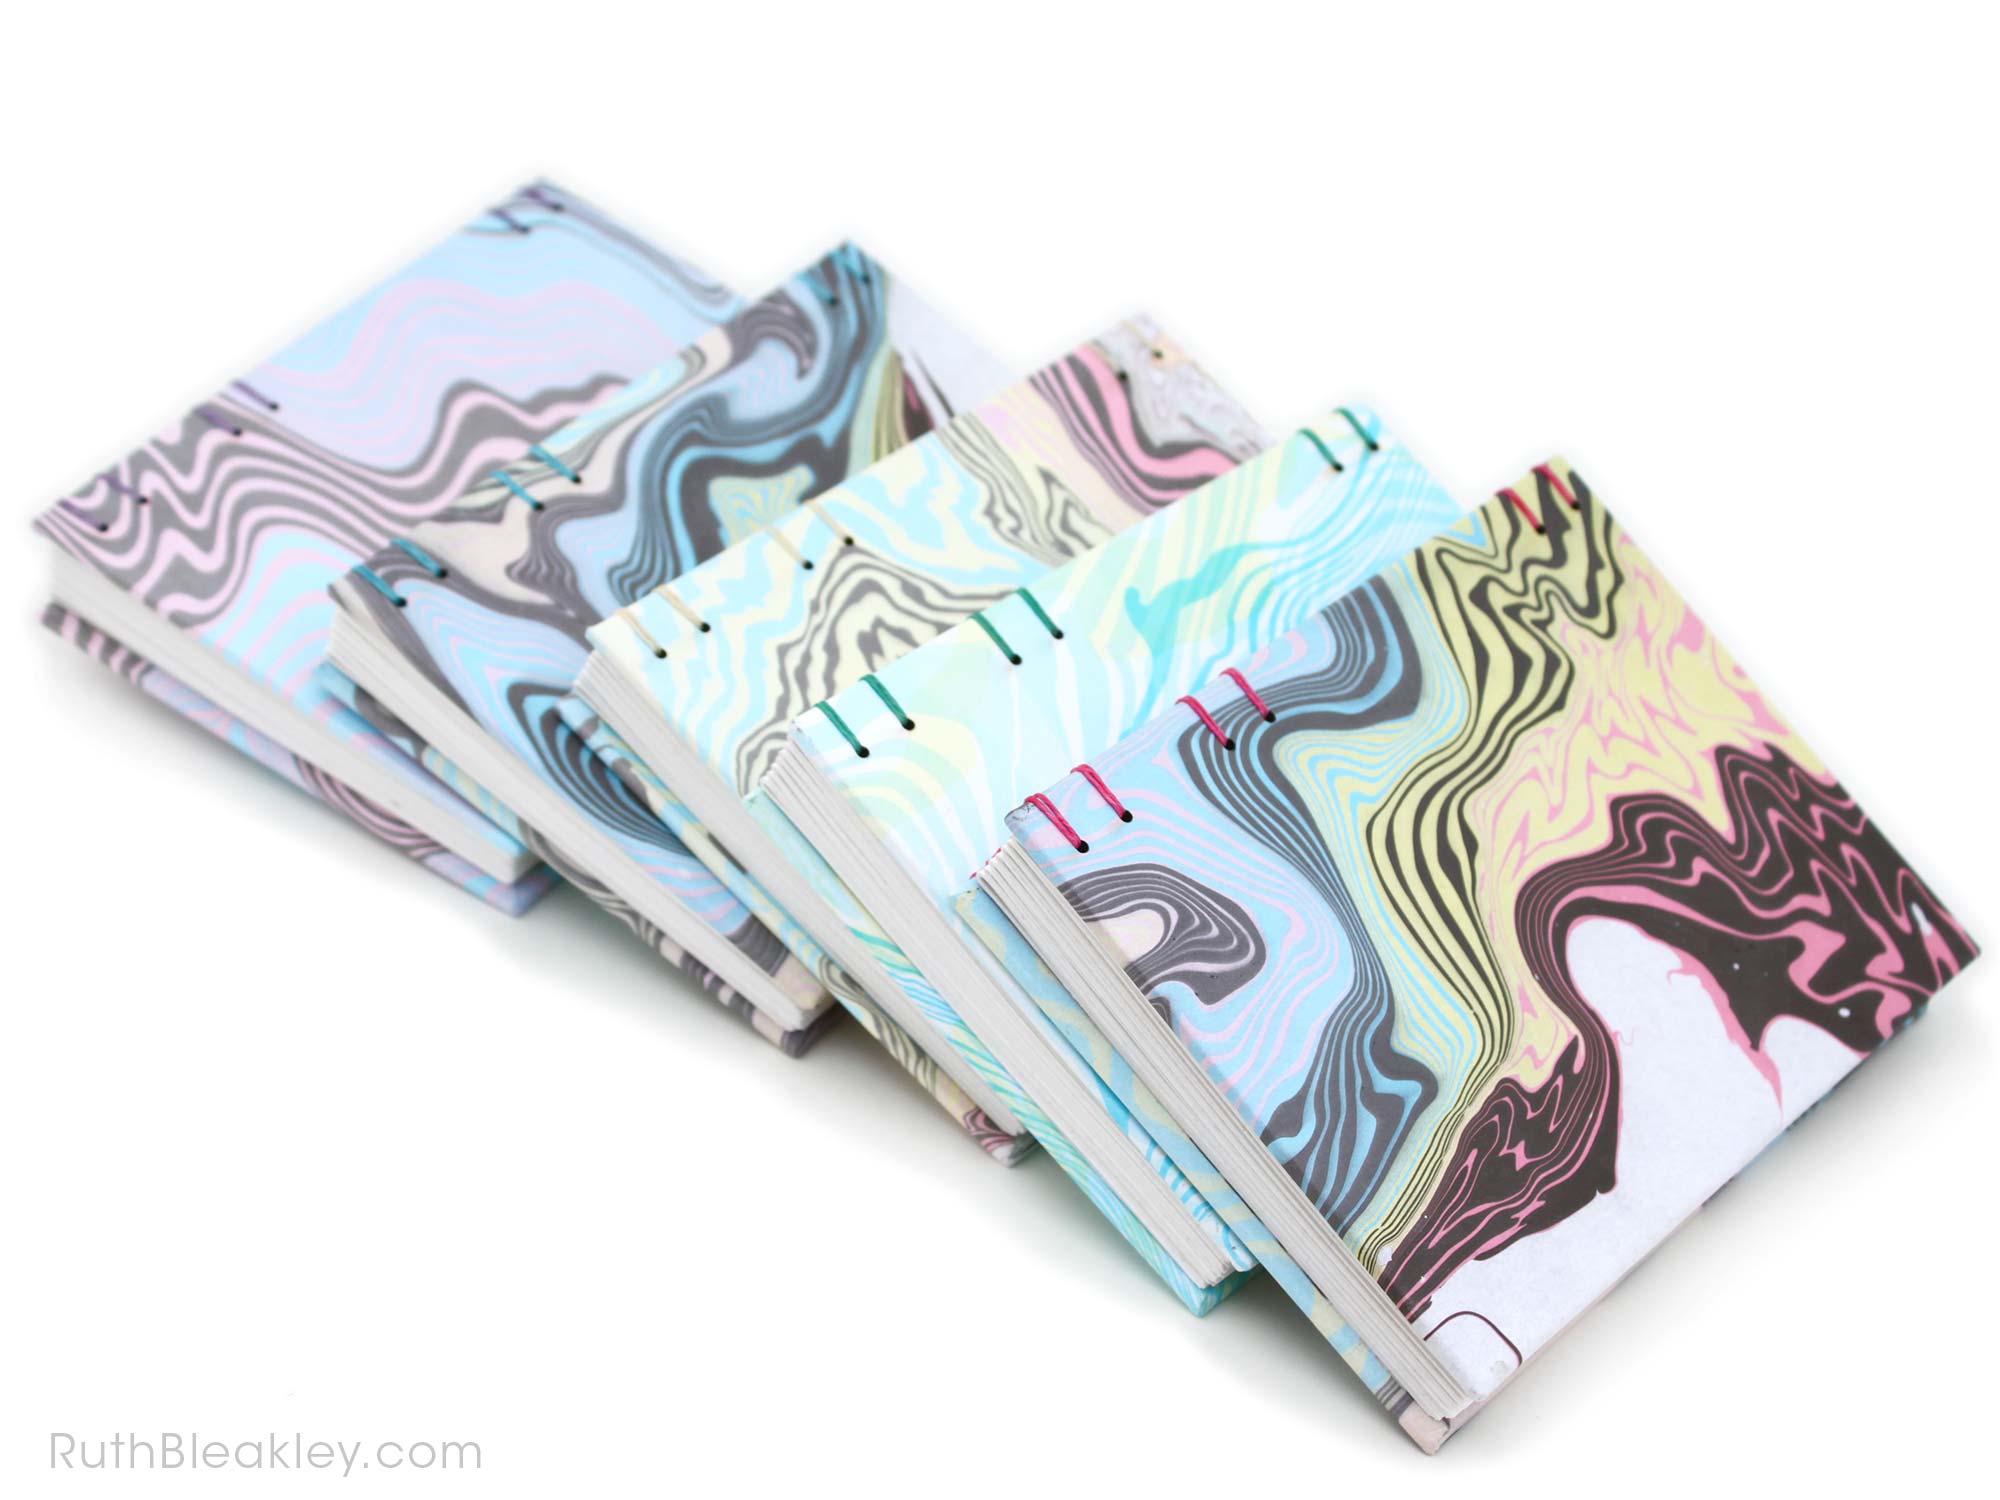 Stack of Suminiagashi Marbled Journals handmade by bookbinder Ruth Bleakley 4